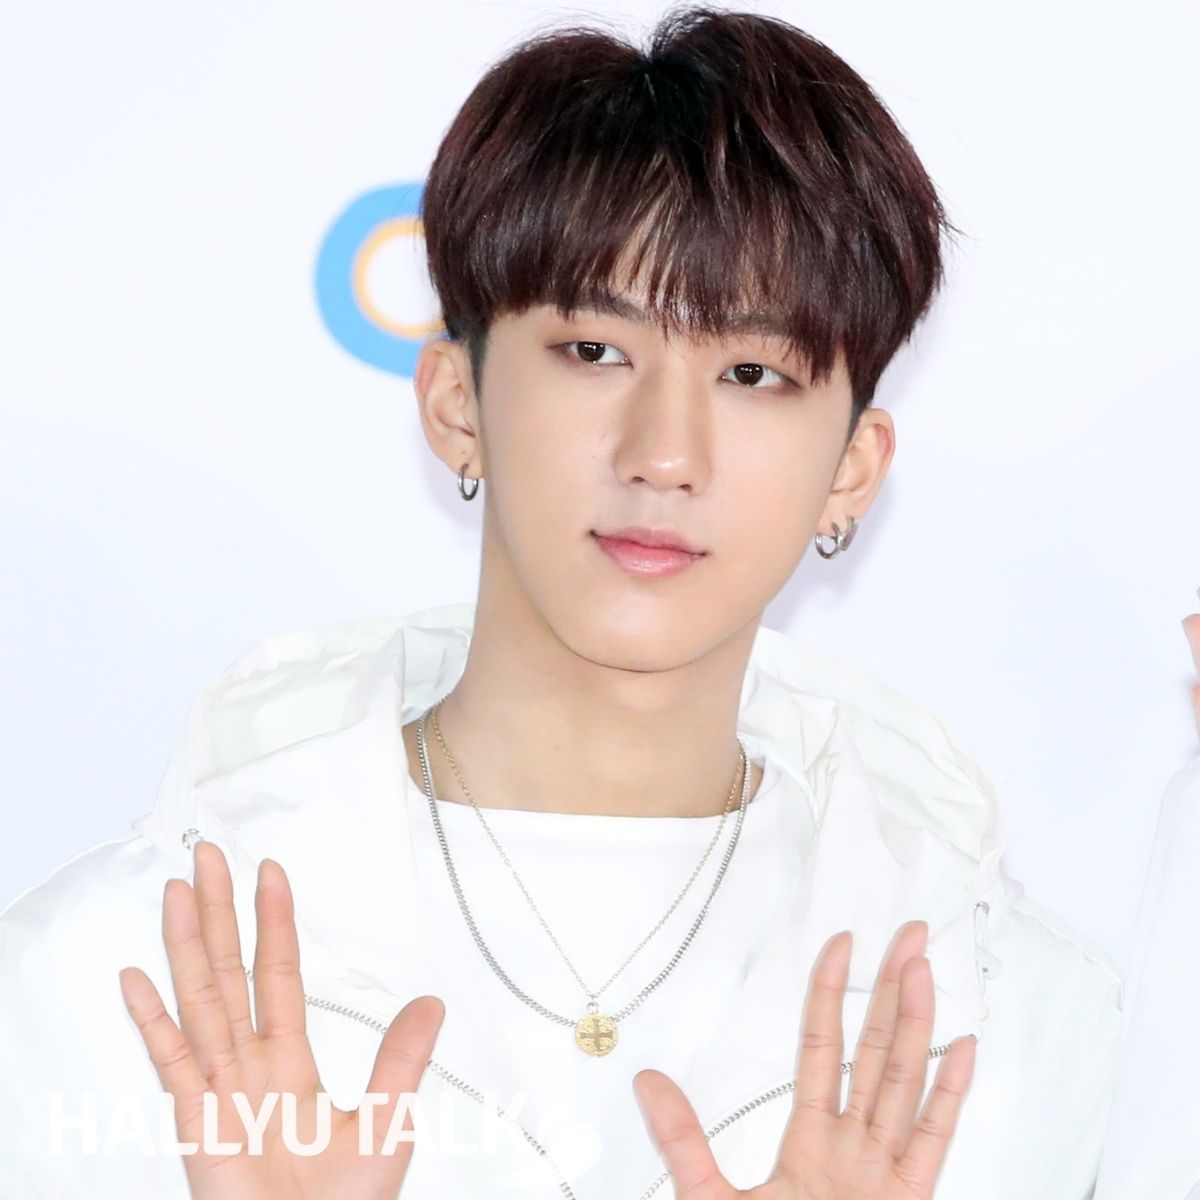 Happy Birthday Stray Kids' Changbin: Who is this young, talented artist?